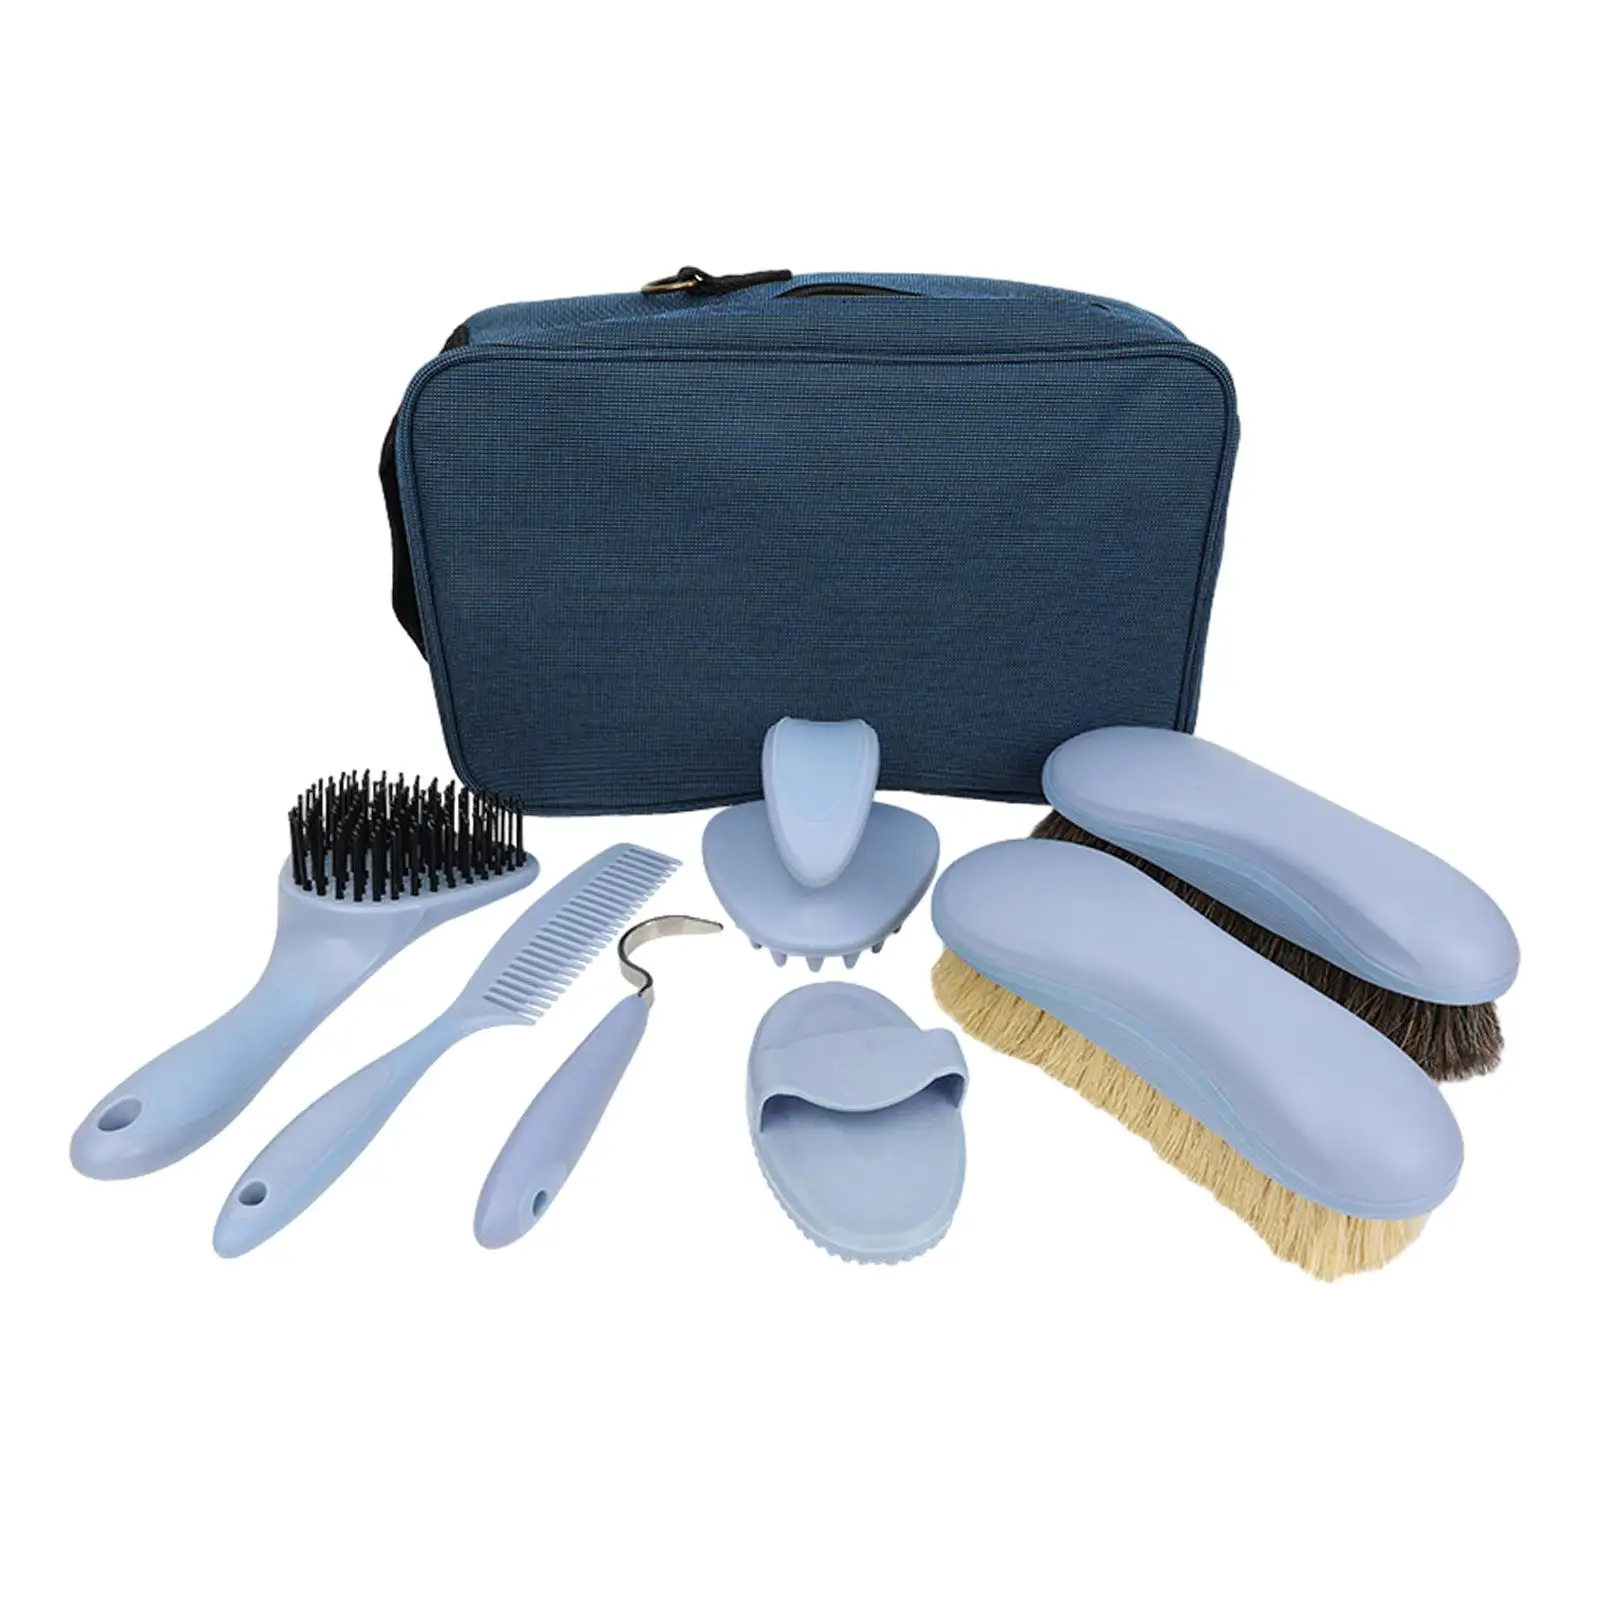 8x-horse-bathing-supplies-horse-grooming-kit-hoof-pick-horse-cleaning-brushes-maintenance-set-for-horse-riders-adults